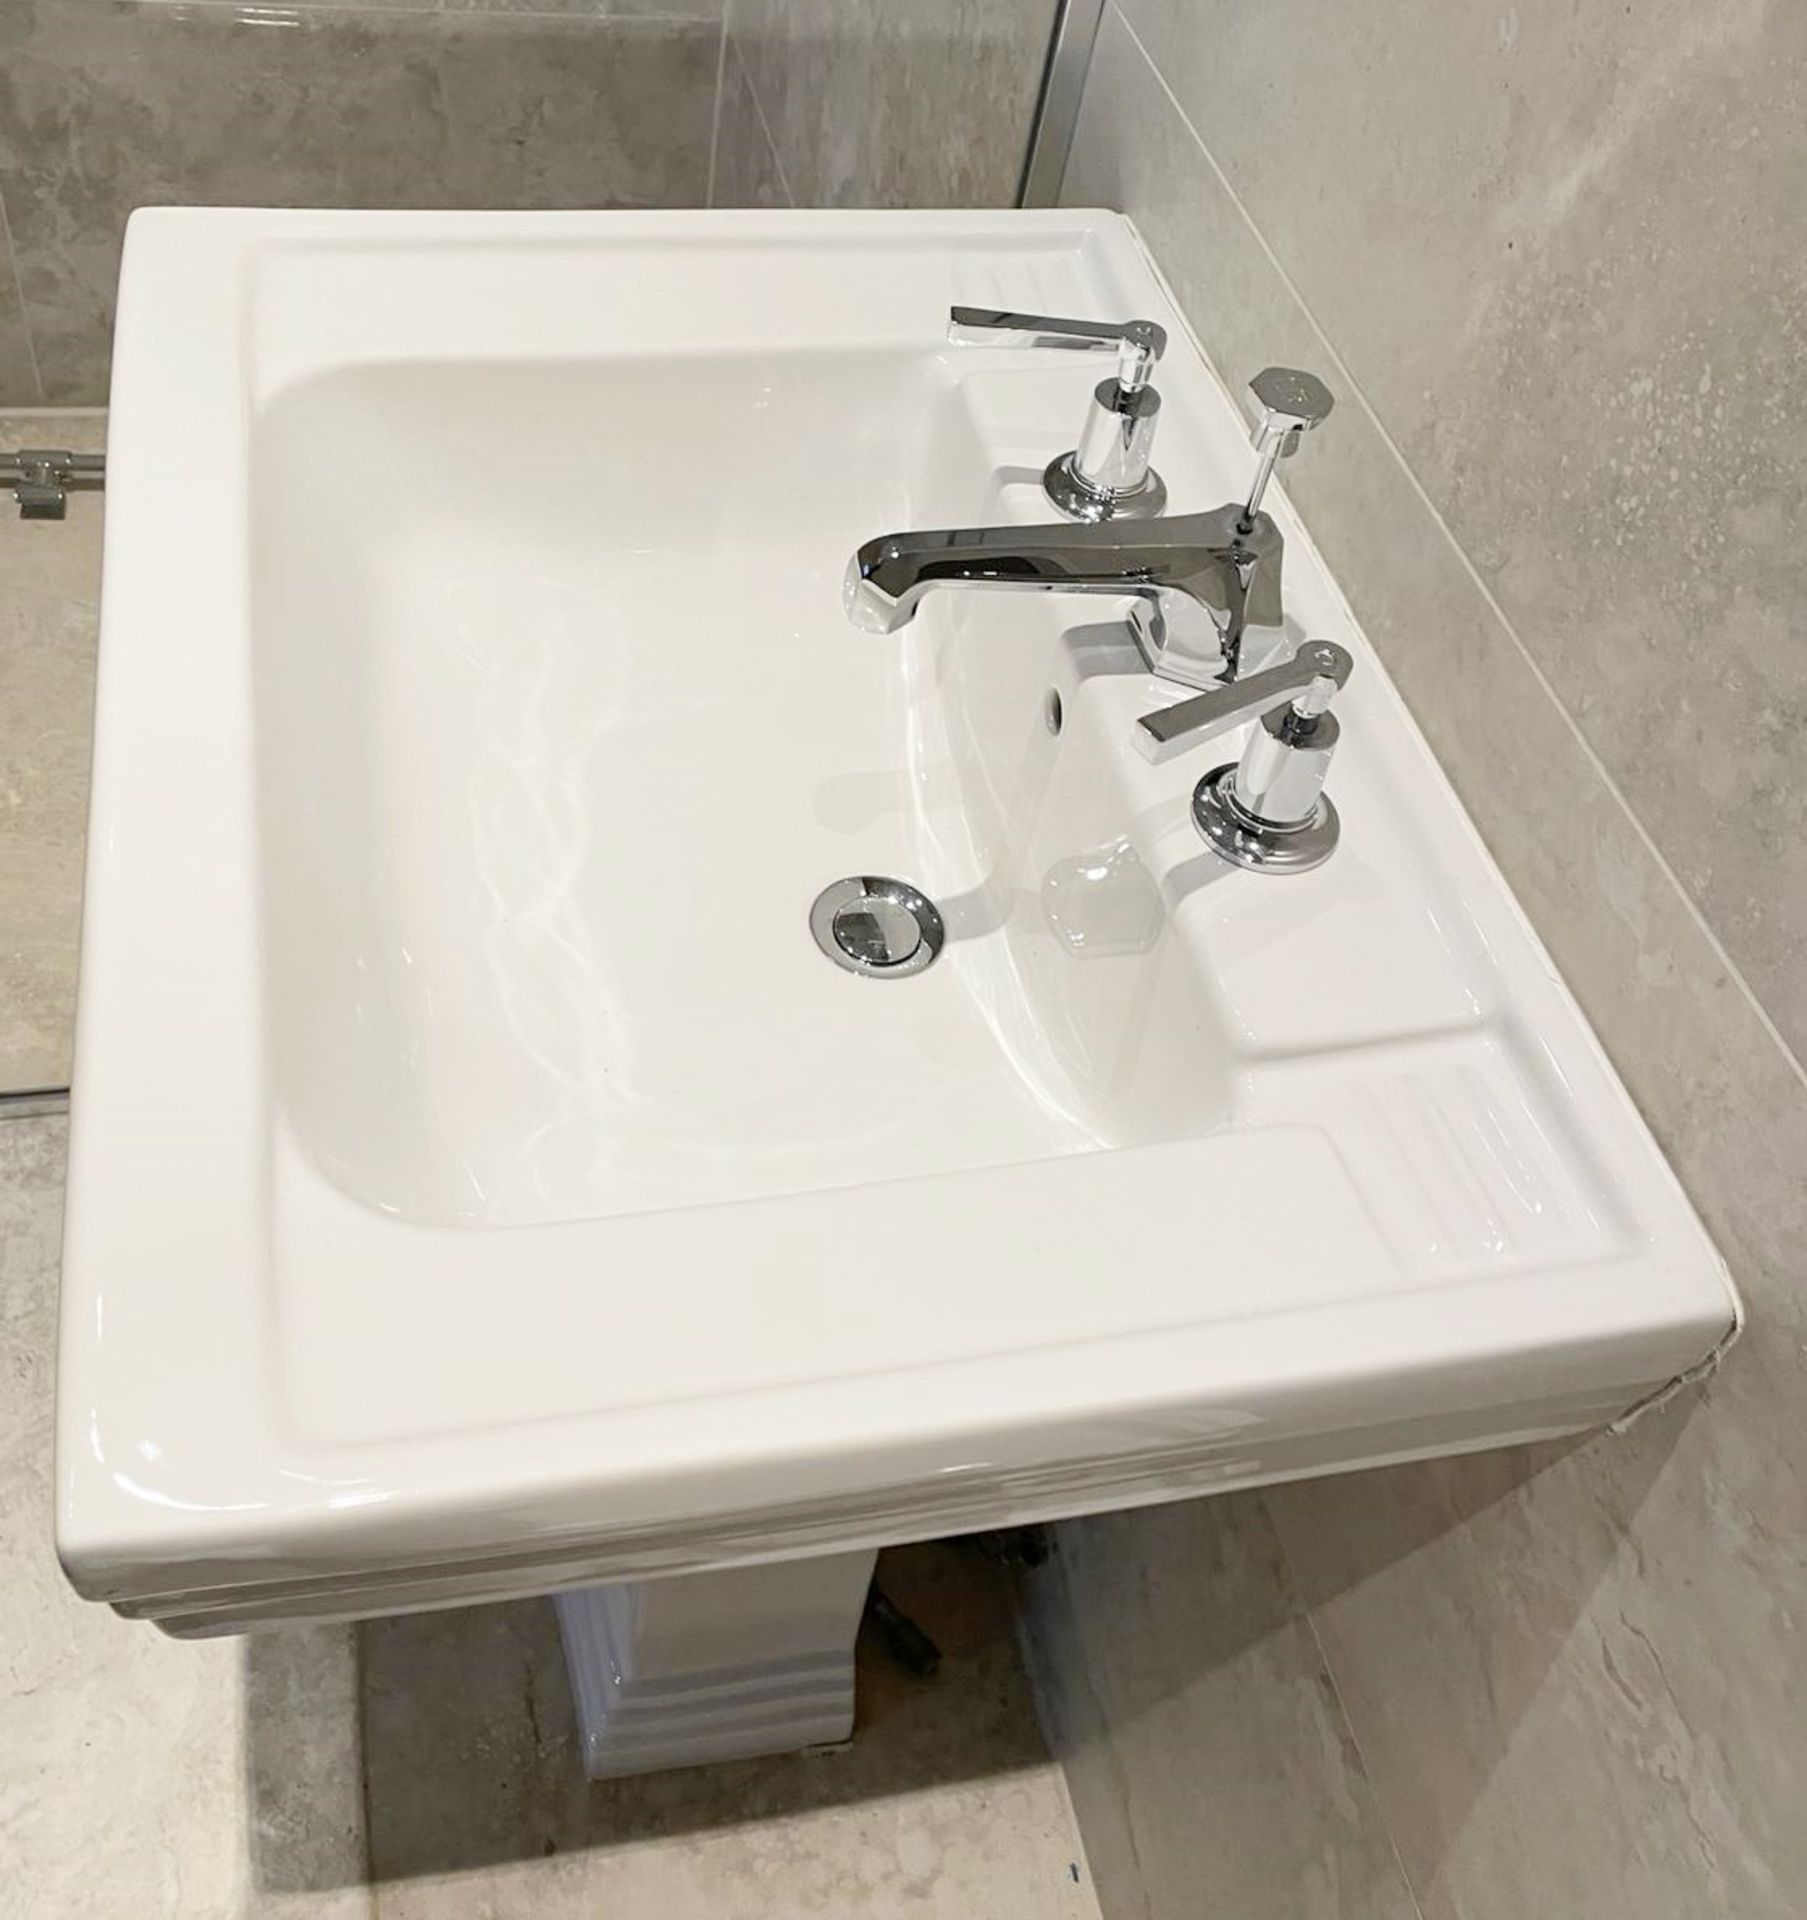 1 x Traditional Style Ceramic Sink and Pedestal - Ref: FBD/R-LNG - CL896 - NO VAT ON THE HAMMER - - Image 6 of 7